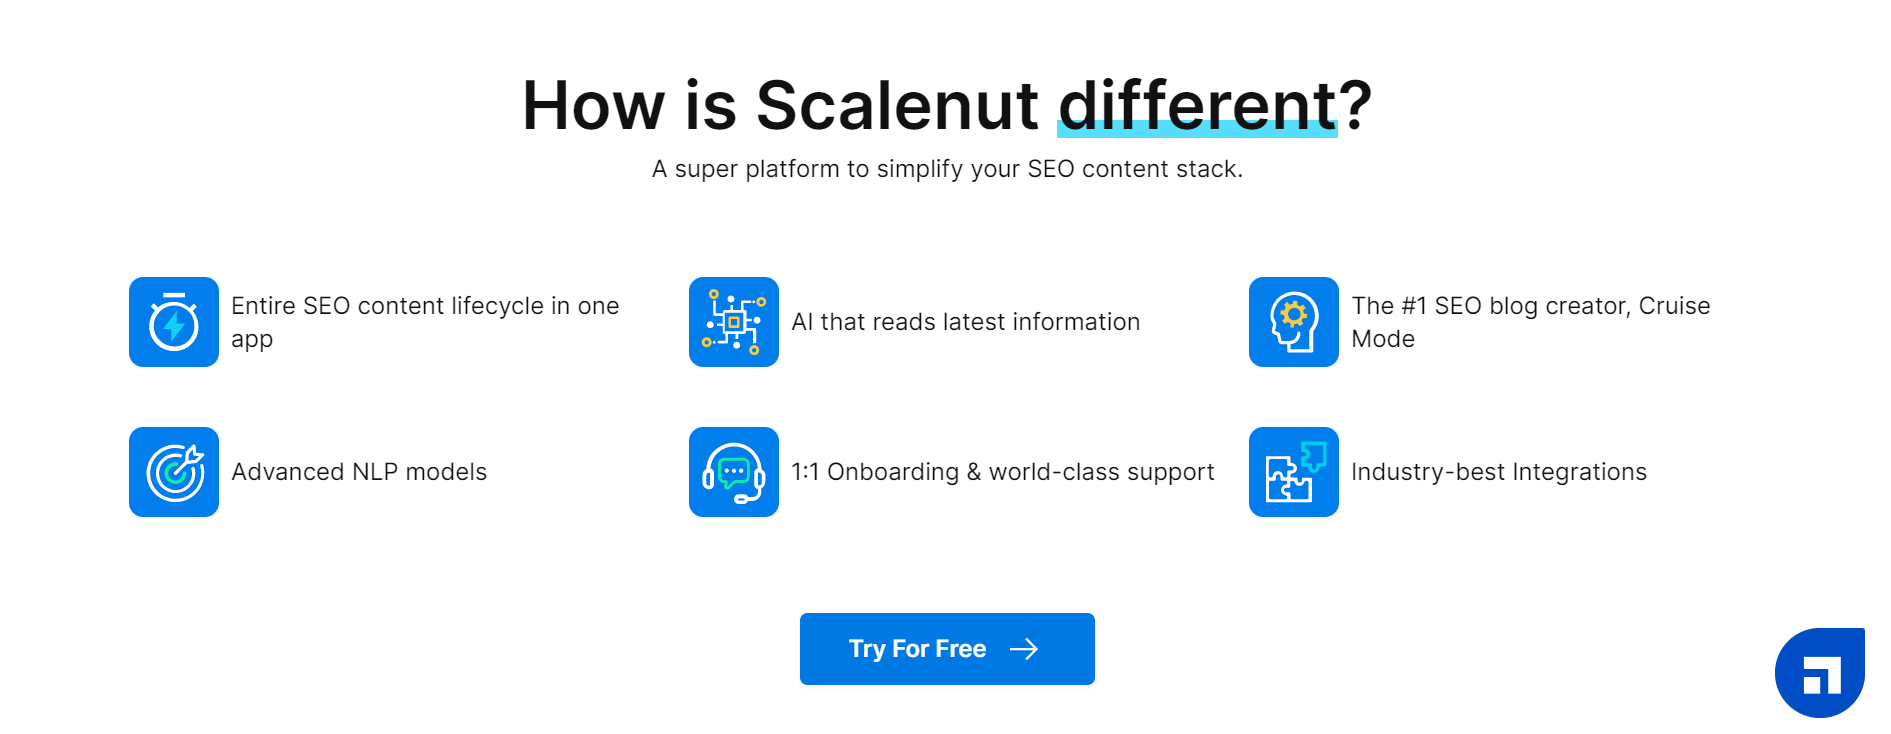 Scalenut Landing Page - How is Scalenut different?